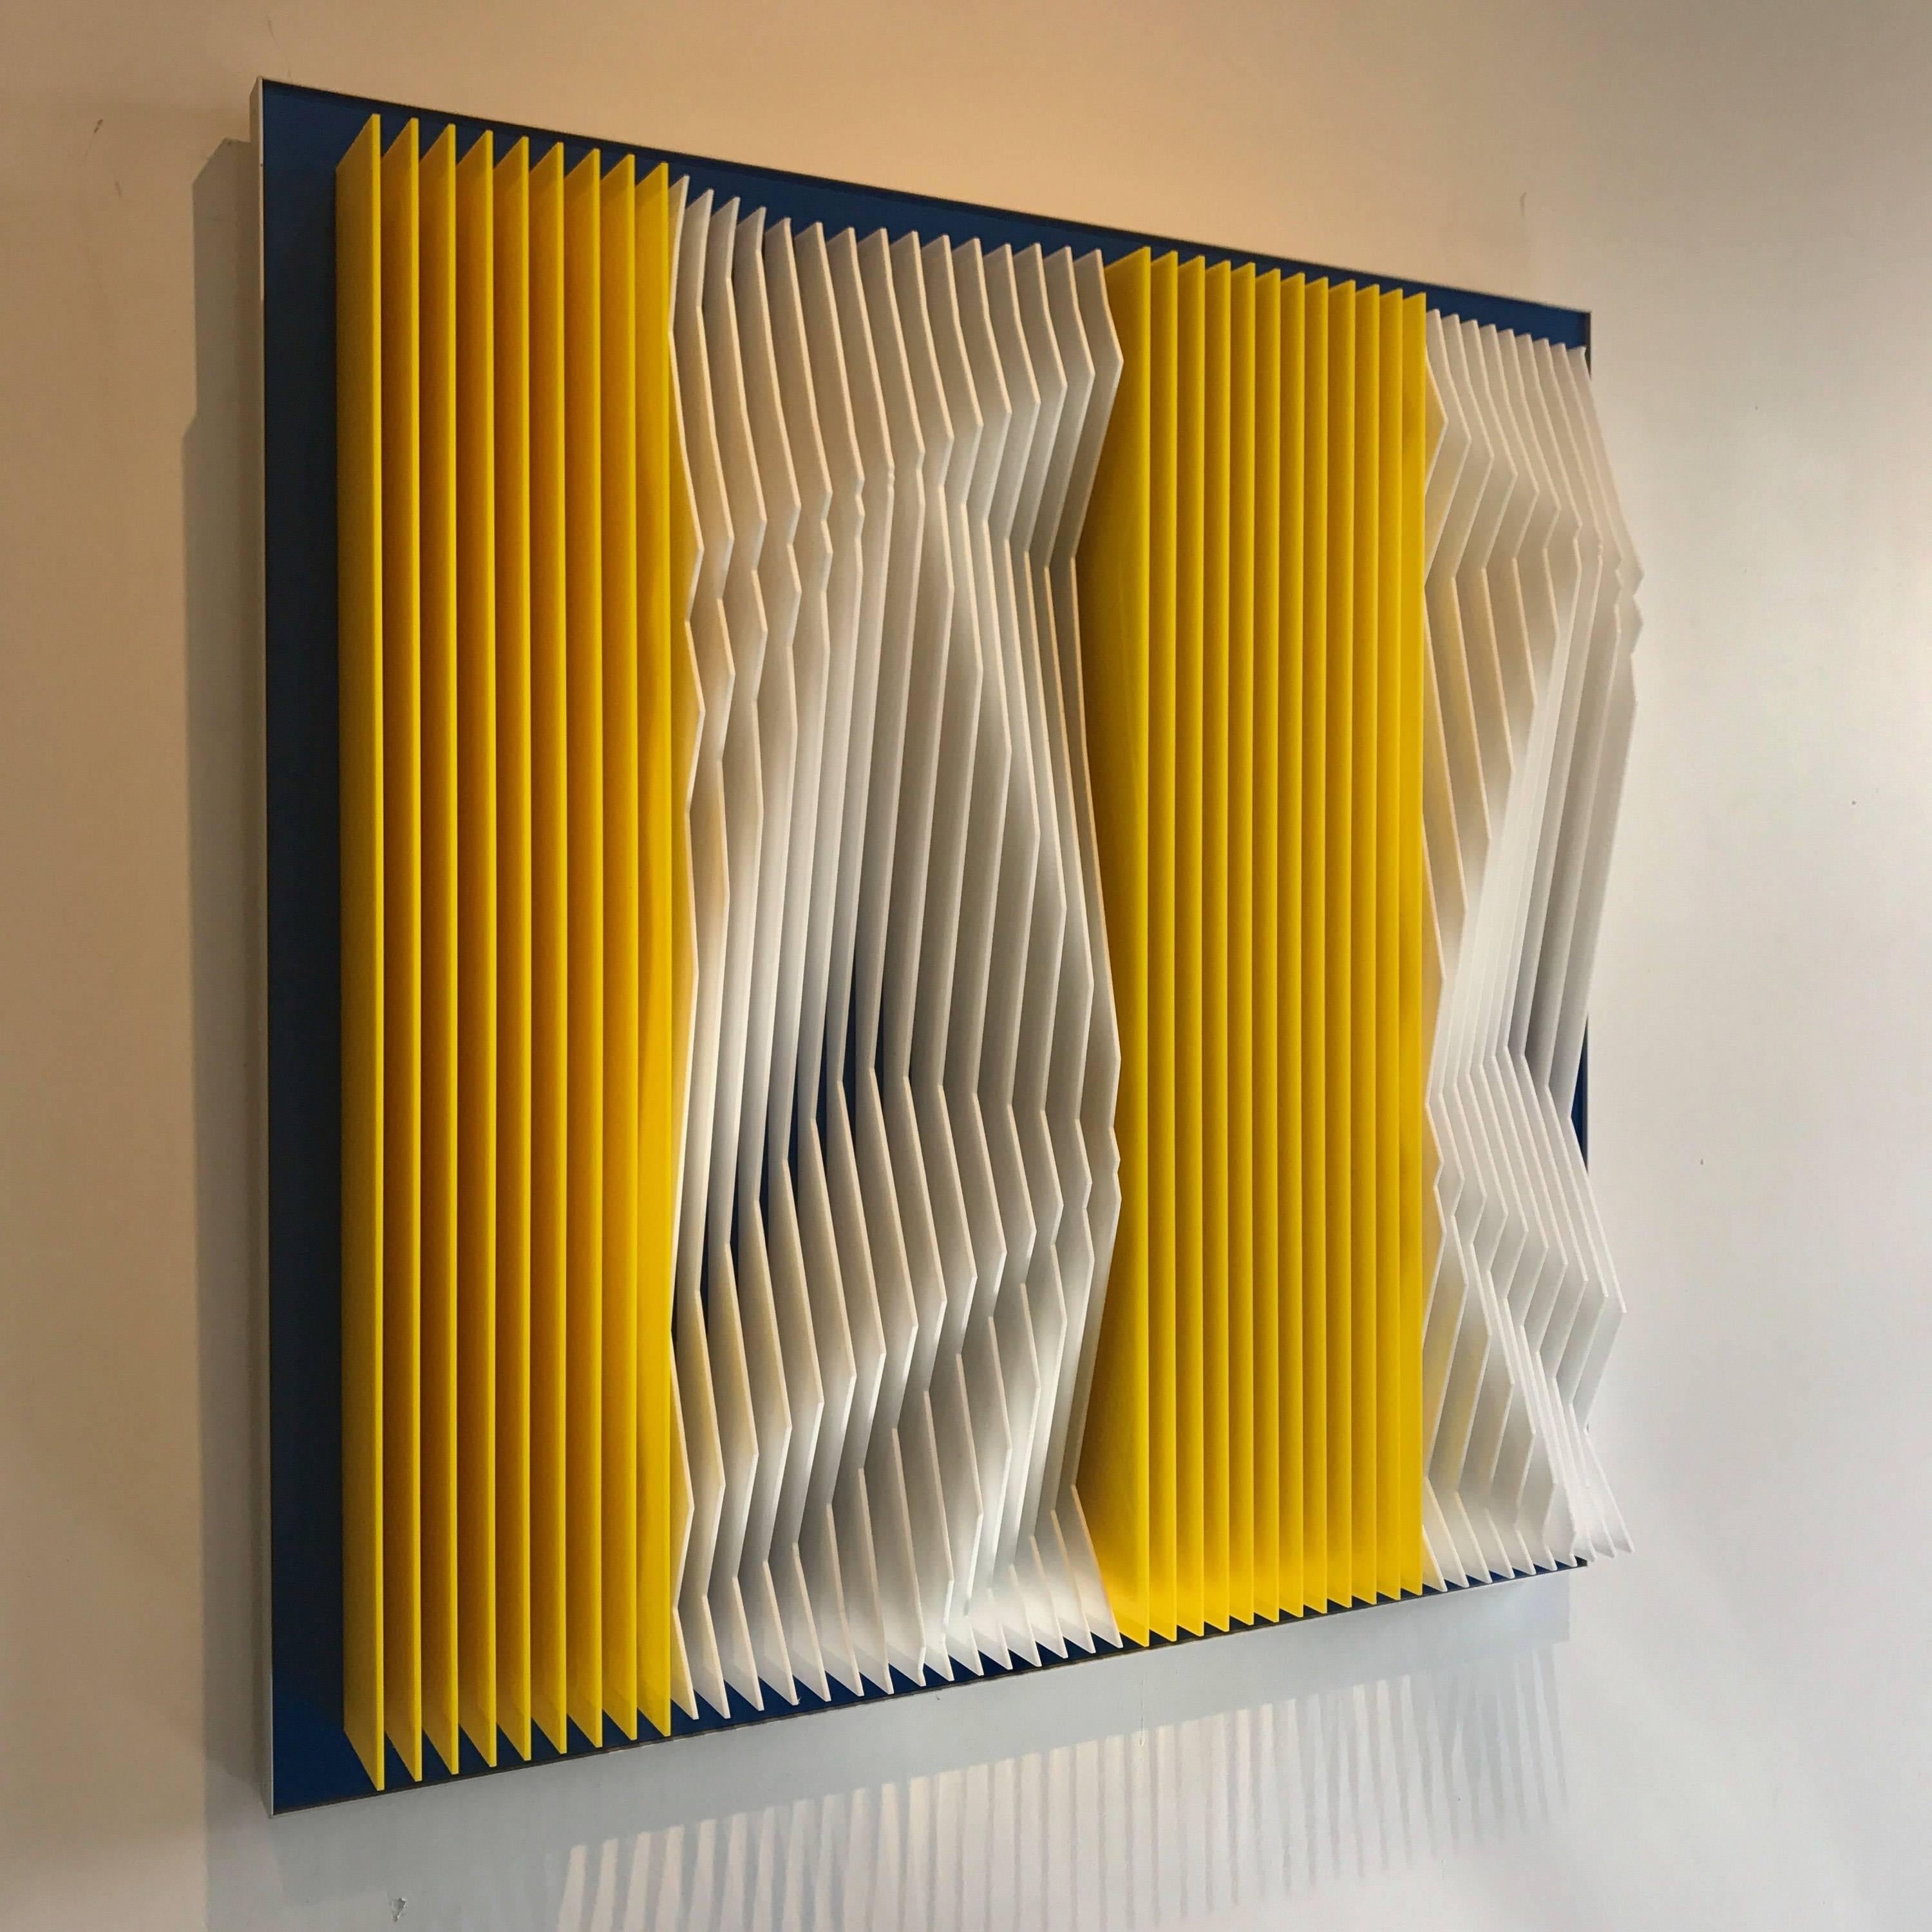 Jose Margulis Abstract Sculpture - Shifting grounds - Geometric Abstract Kinetic Art by J. Margulis